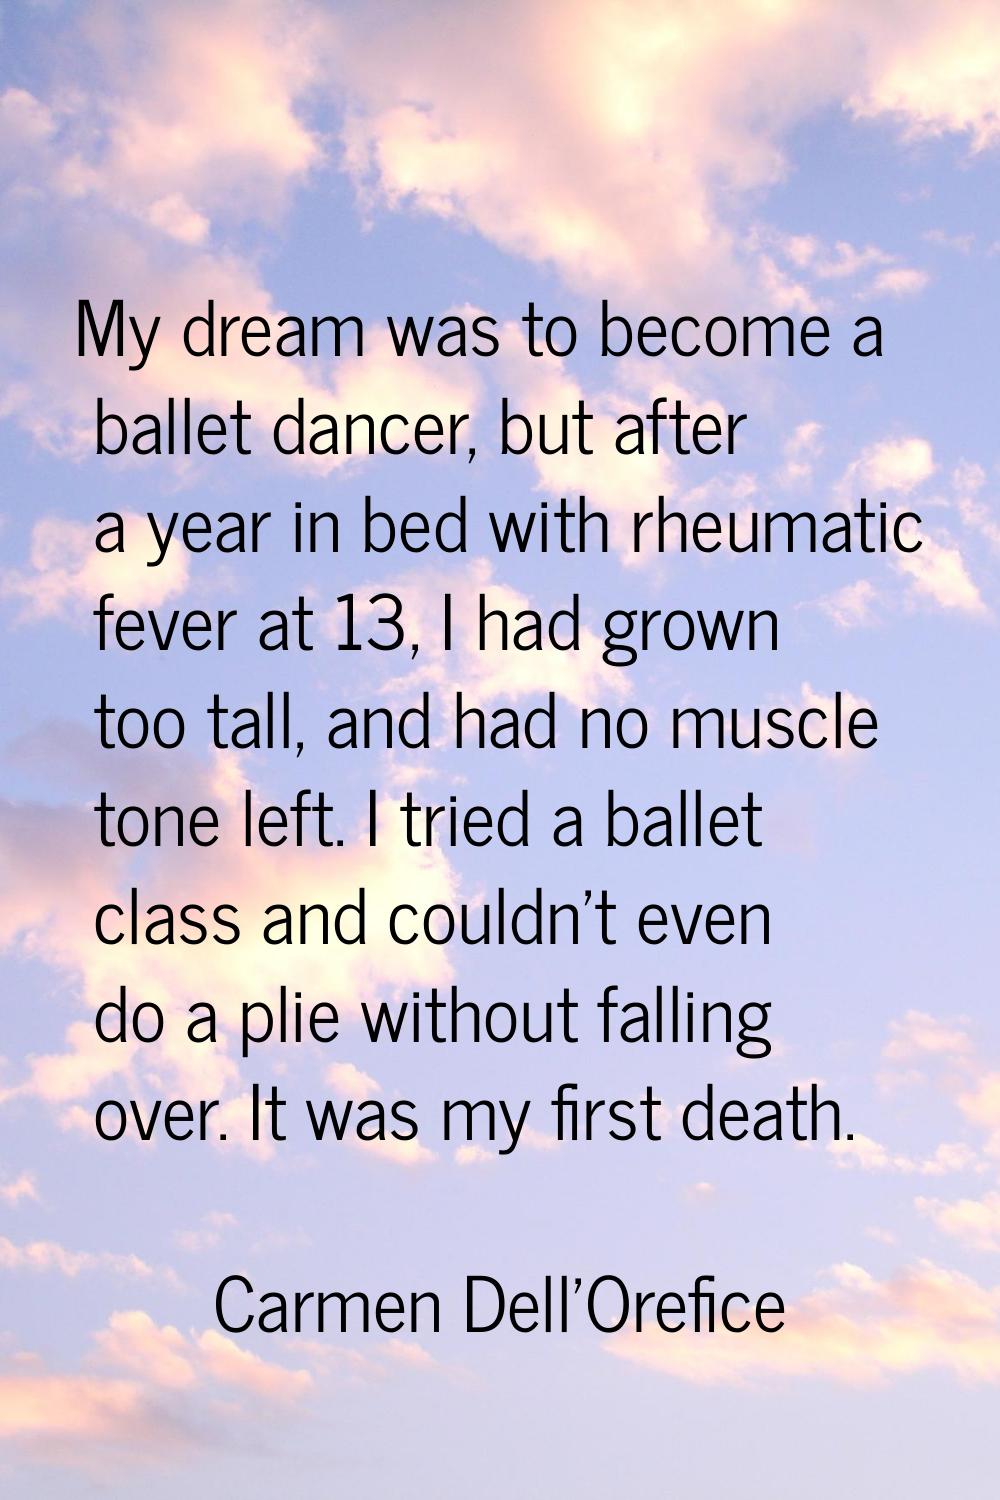 My dream was to become a ballet dancer, but after a year in bed with rheumatic fever at 13, I had g